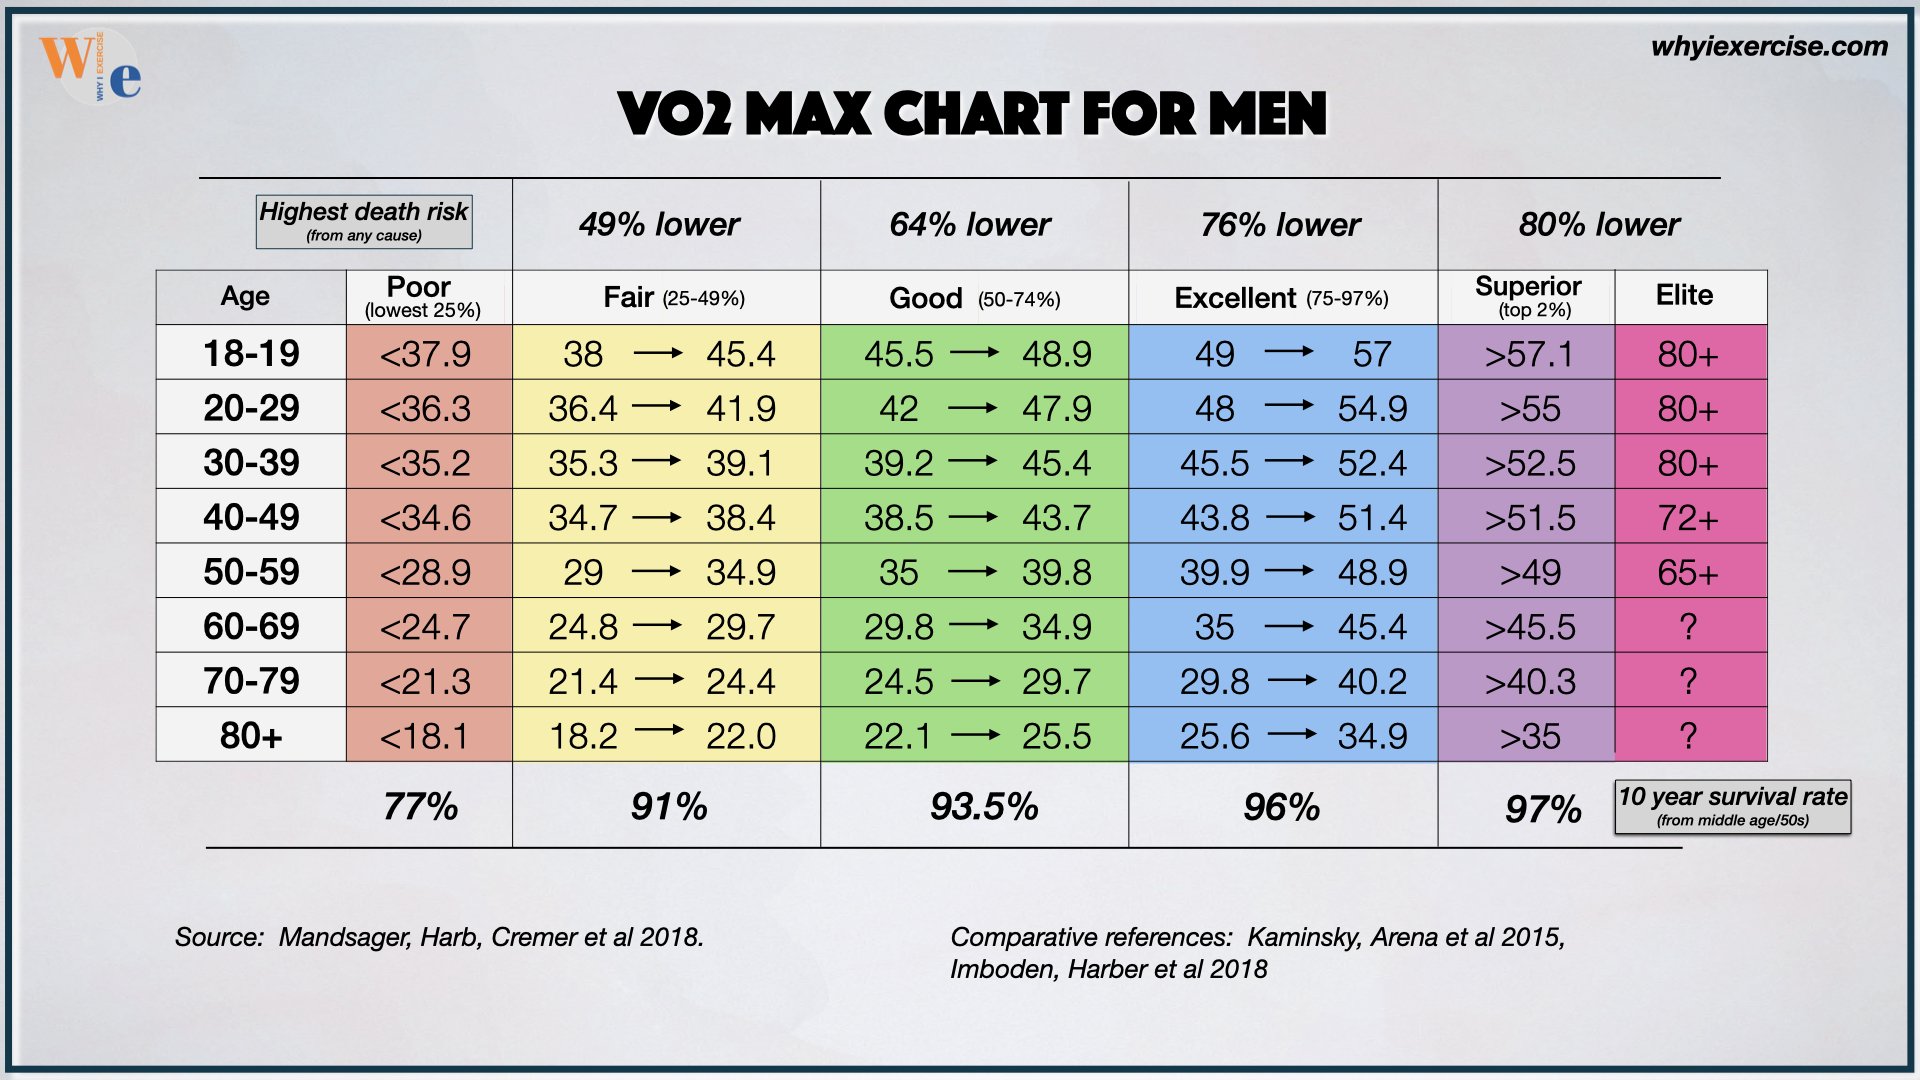 Vo2 max chart for men, healthy standard by age group